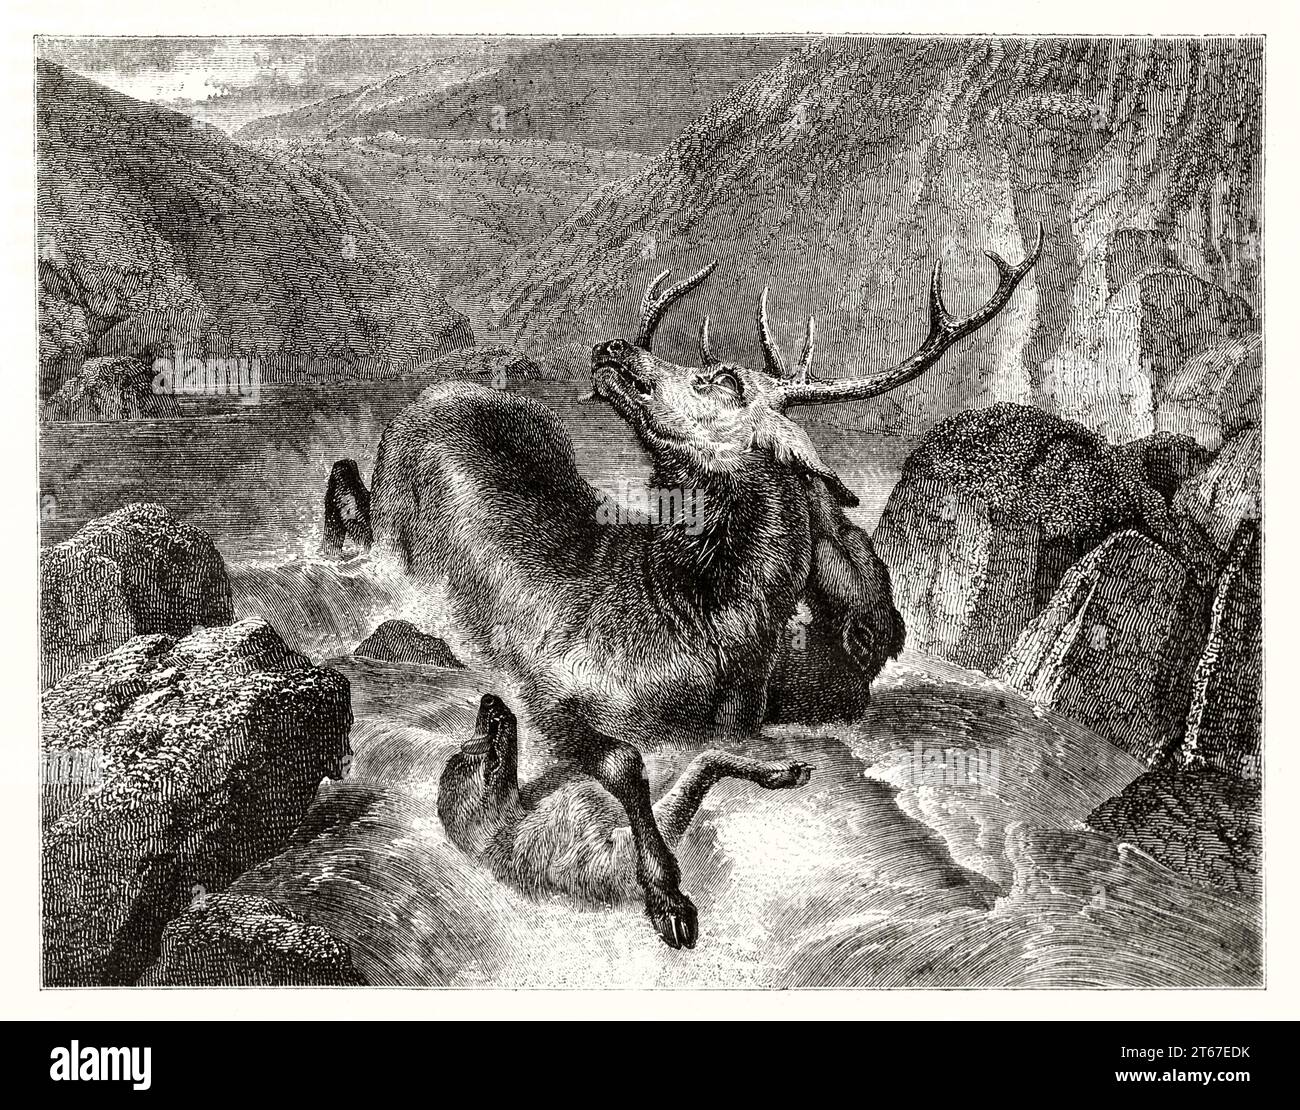 Old illustration of a deer dying. By Landseer, publ. on Magasin Pittoresque, Paris, 1851 Stock Photo